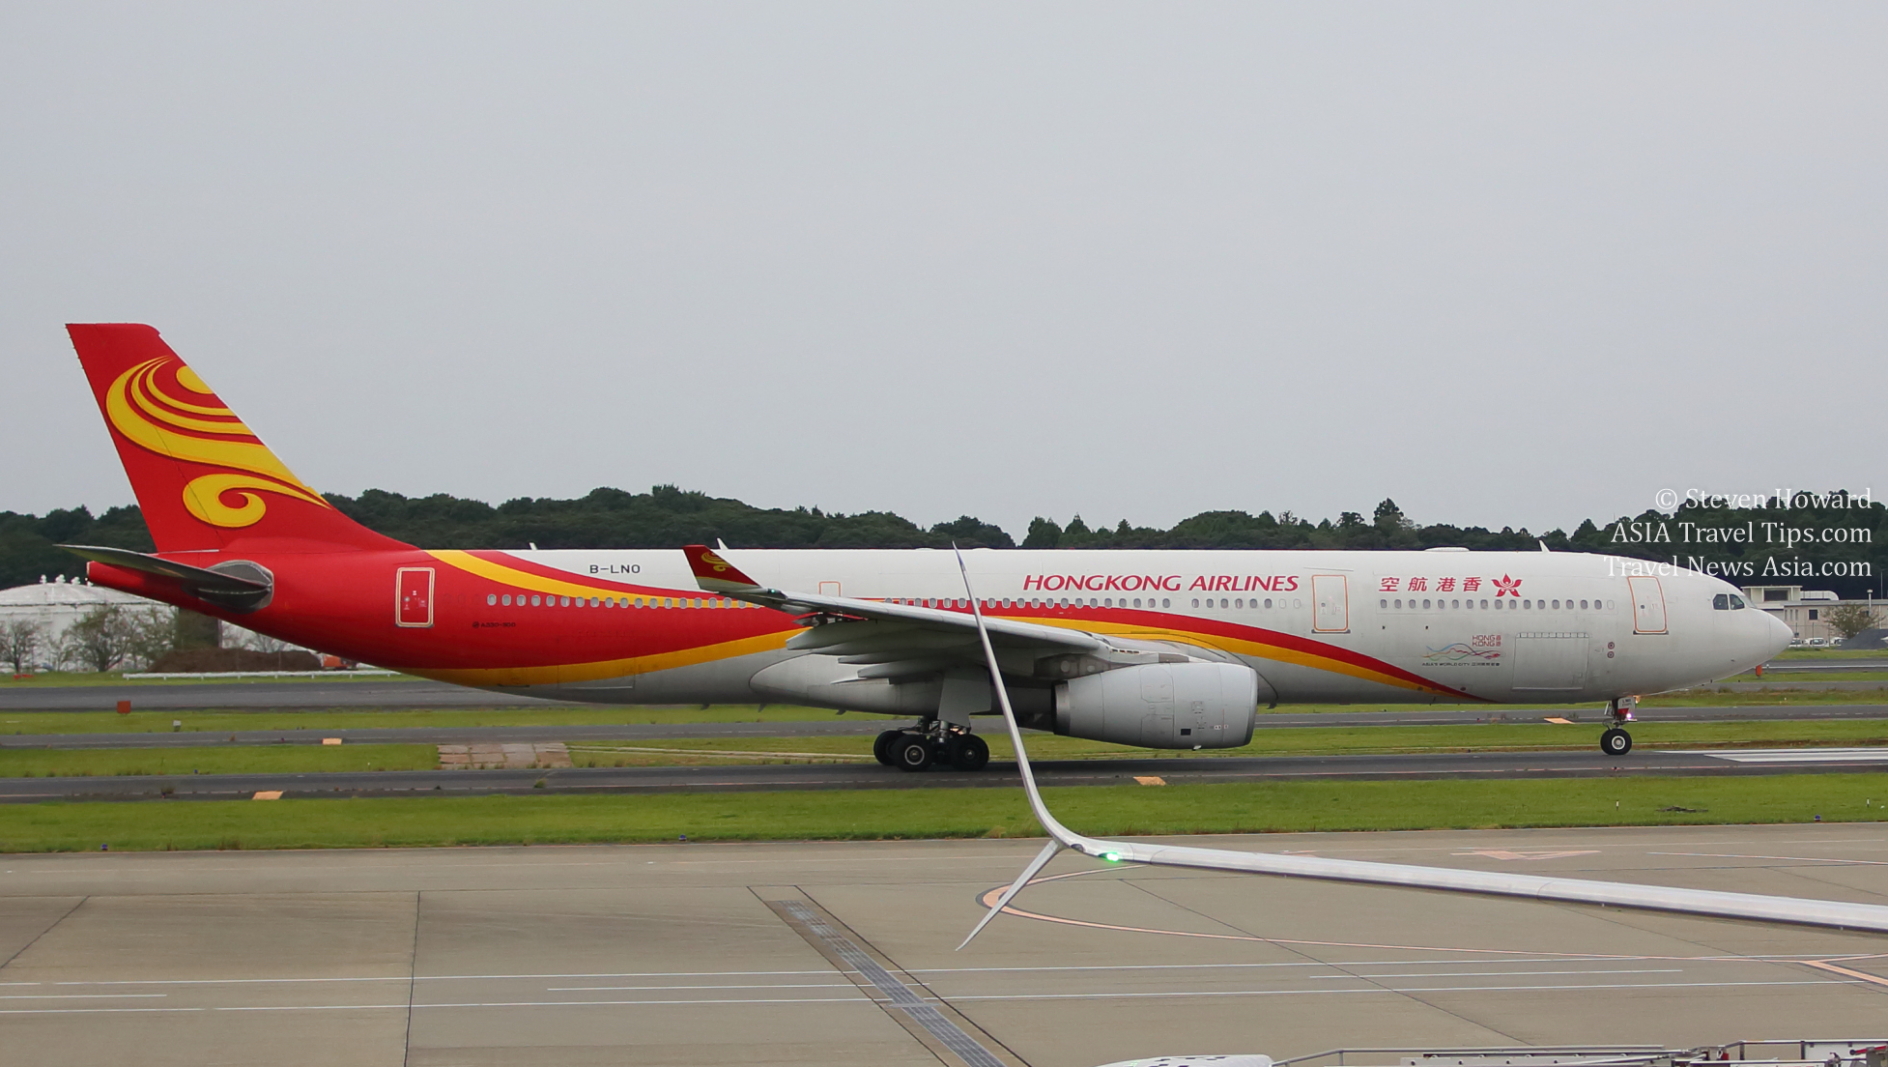 Hong Kong Airlines A330 reg: B-LNO.  Image by Steven Howard of TravelNewsAsia.com Click to enlarge.